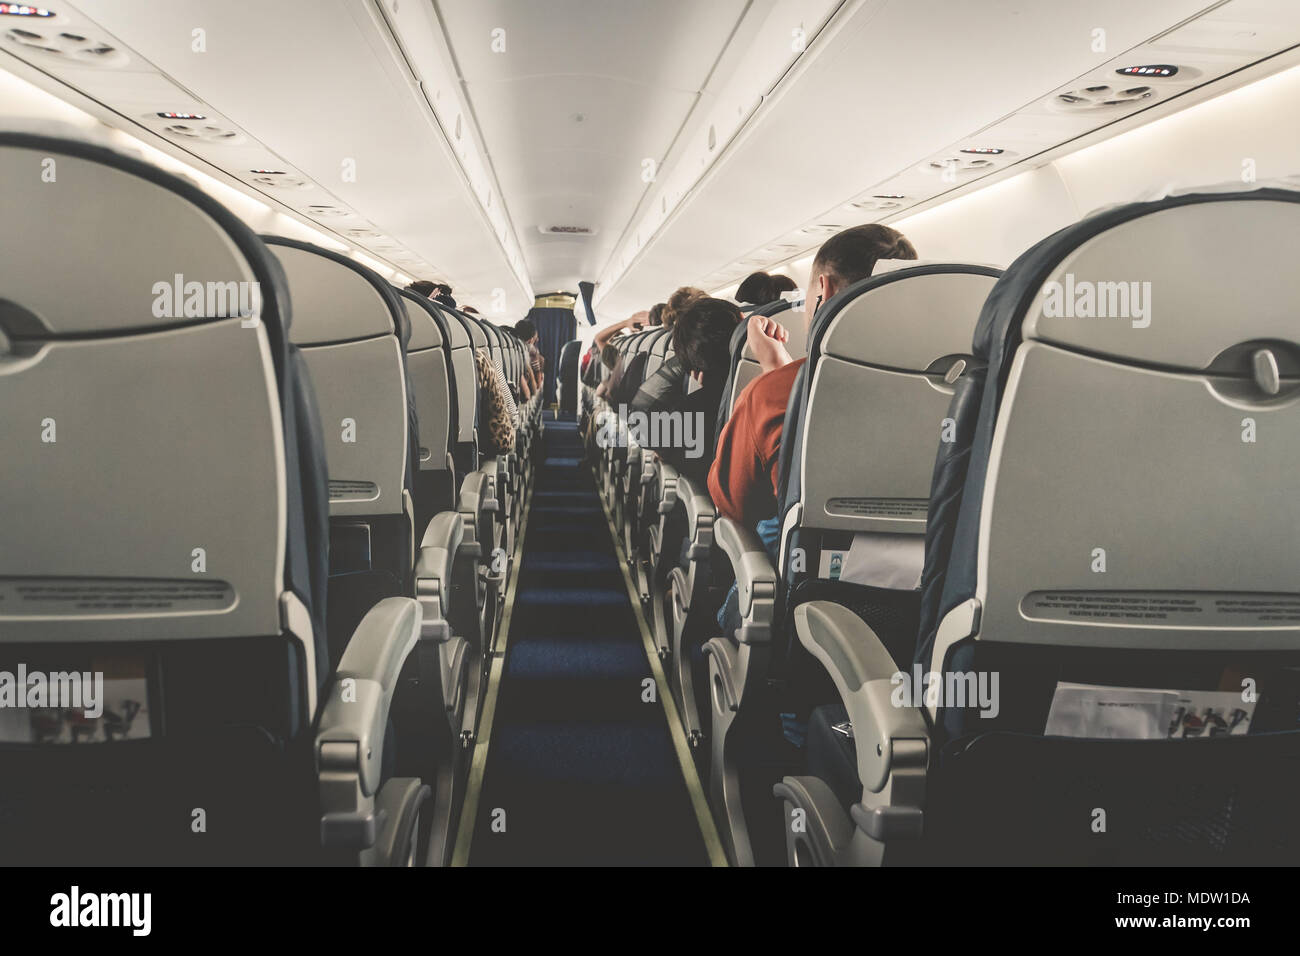 Interior of airplane with passengers on seats waiting to taik off.  Horizontal composition. boring flight in economy class aircraft salon.  economy clas Stock Photo - Alamy